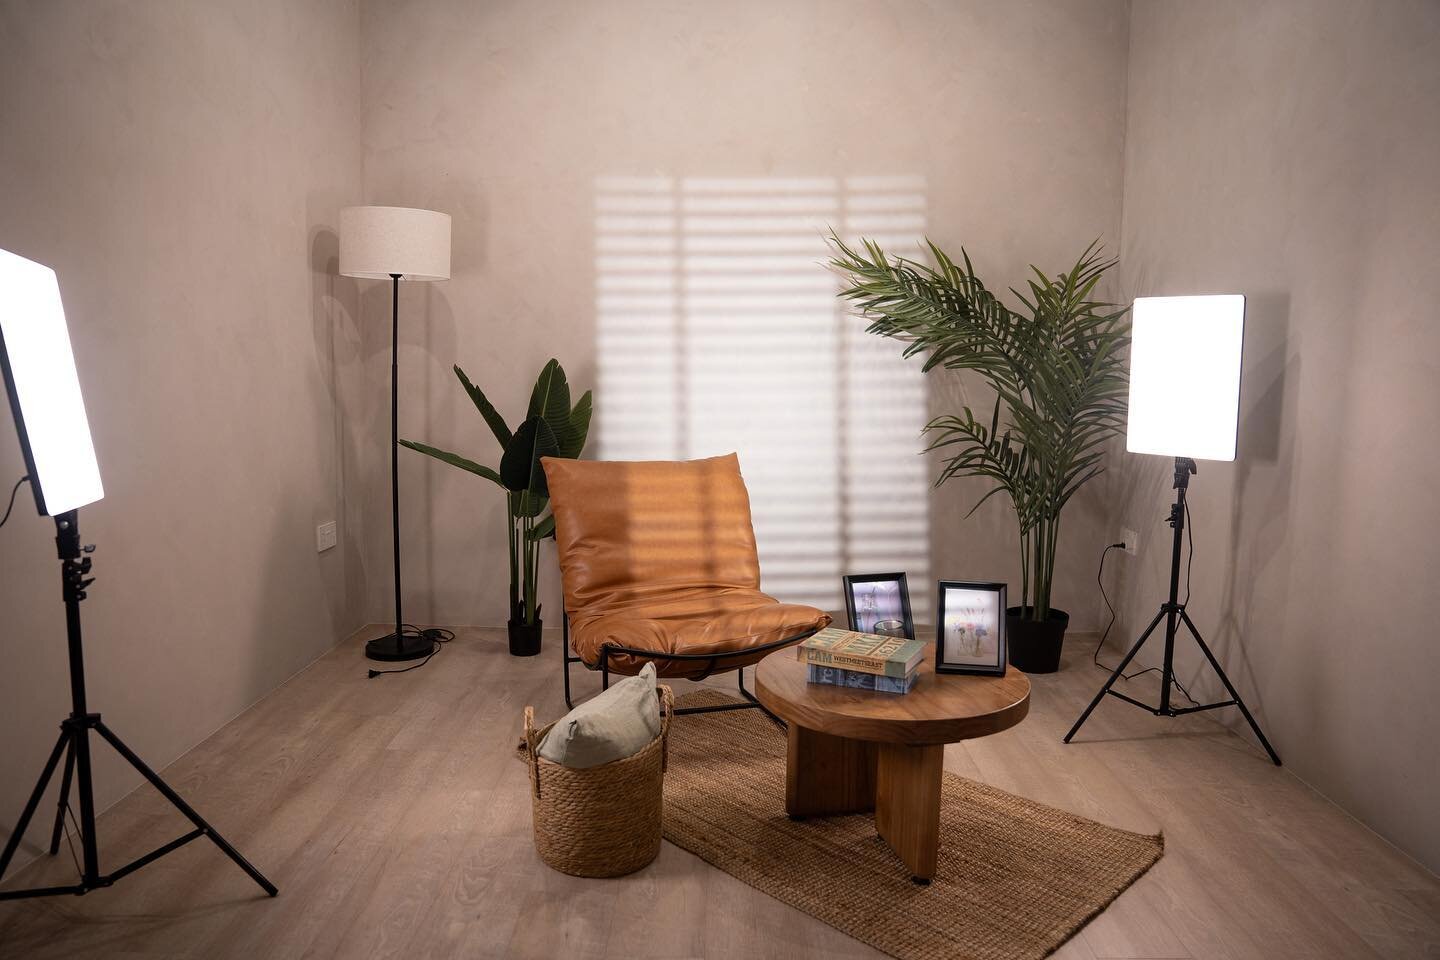 🏠 Open for 24/7 bookings, each space in Studioto is a unique oasis for your artistic vision. 🎨📸 Experience 4 incredible settings for the price of one! Available for bookings now 🌟 Link in bio